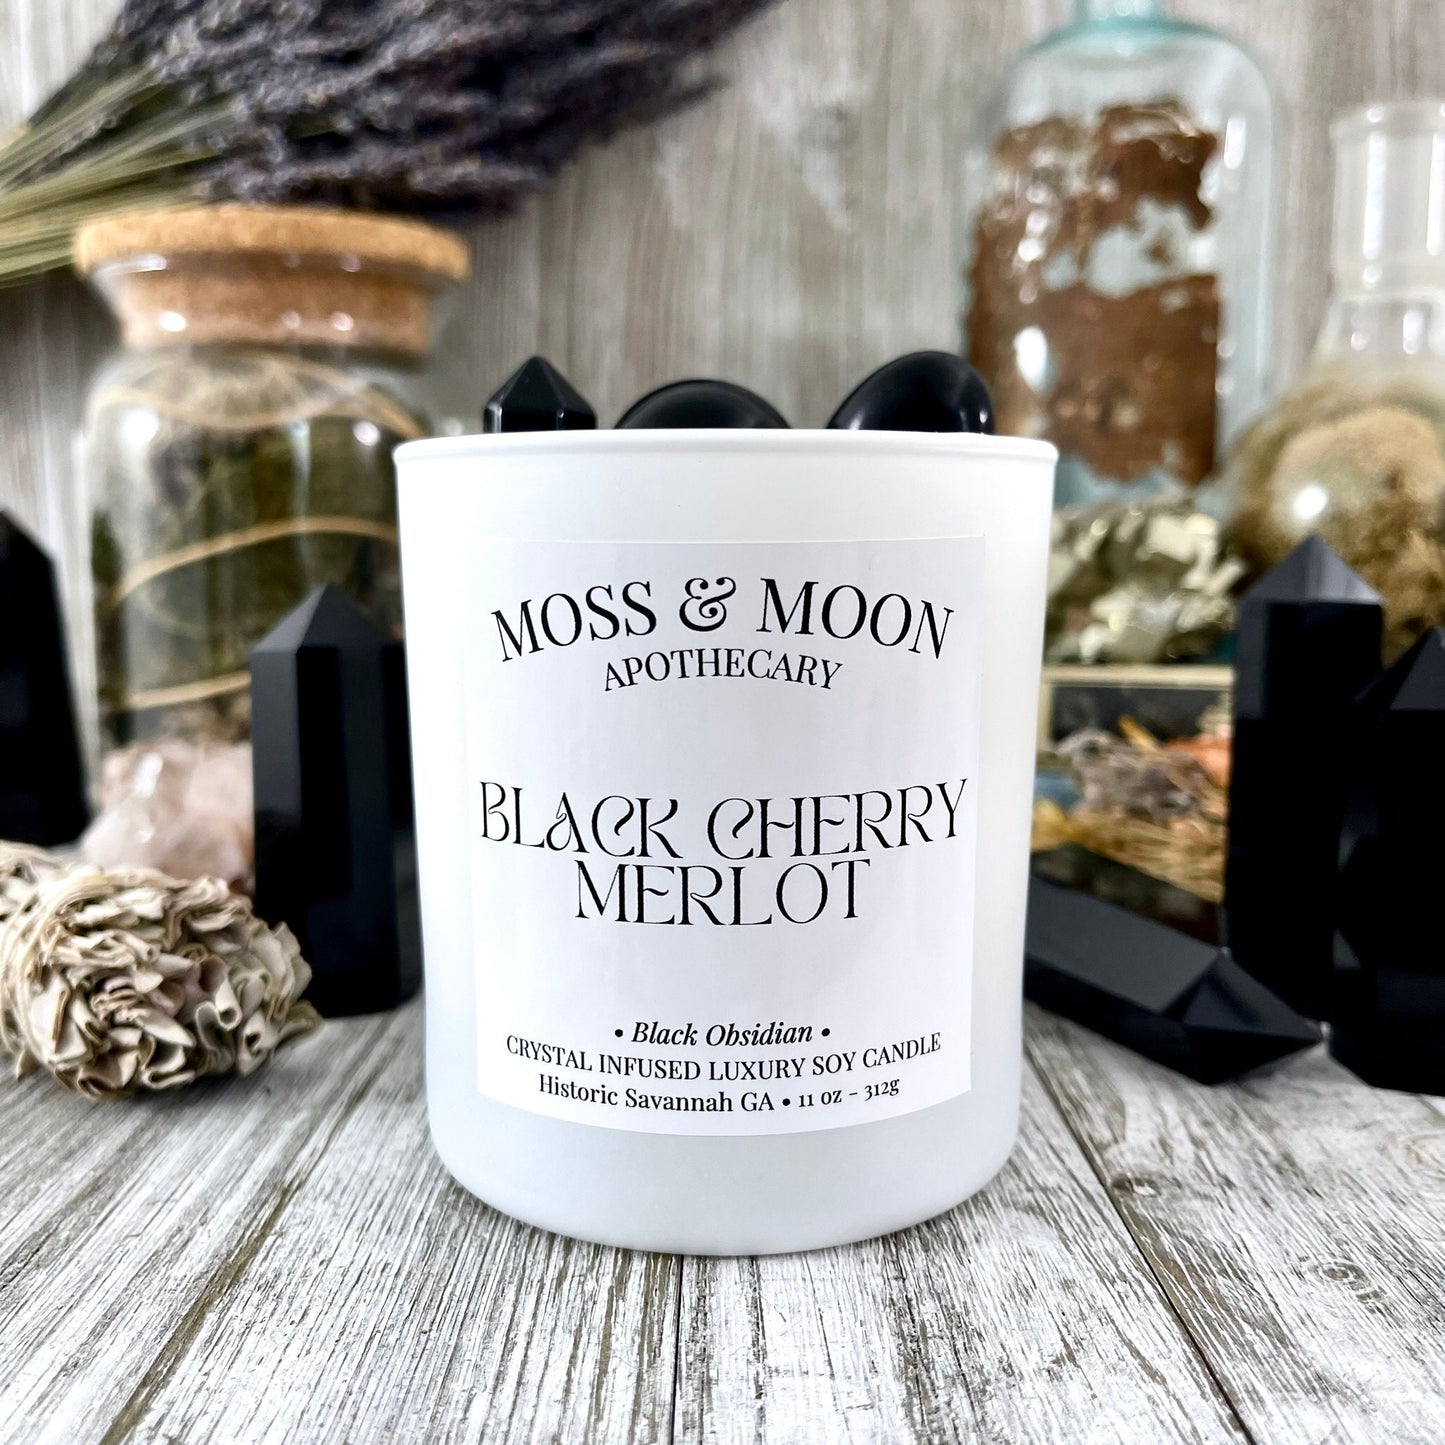 Black Cherry Merlot Candle with Black Obsidian - Moss & Moon Apothecary Luxury Soy Crystal Candle /